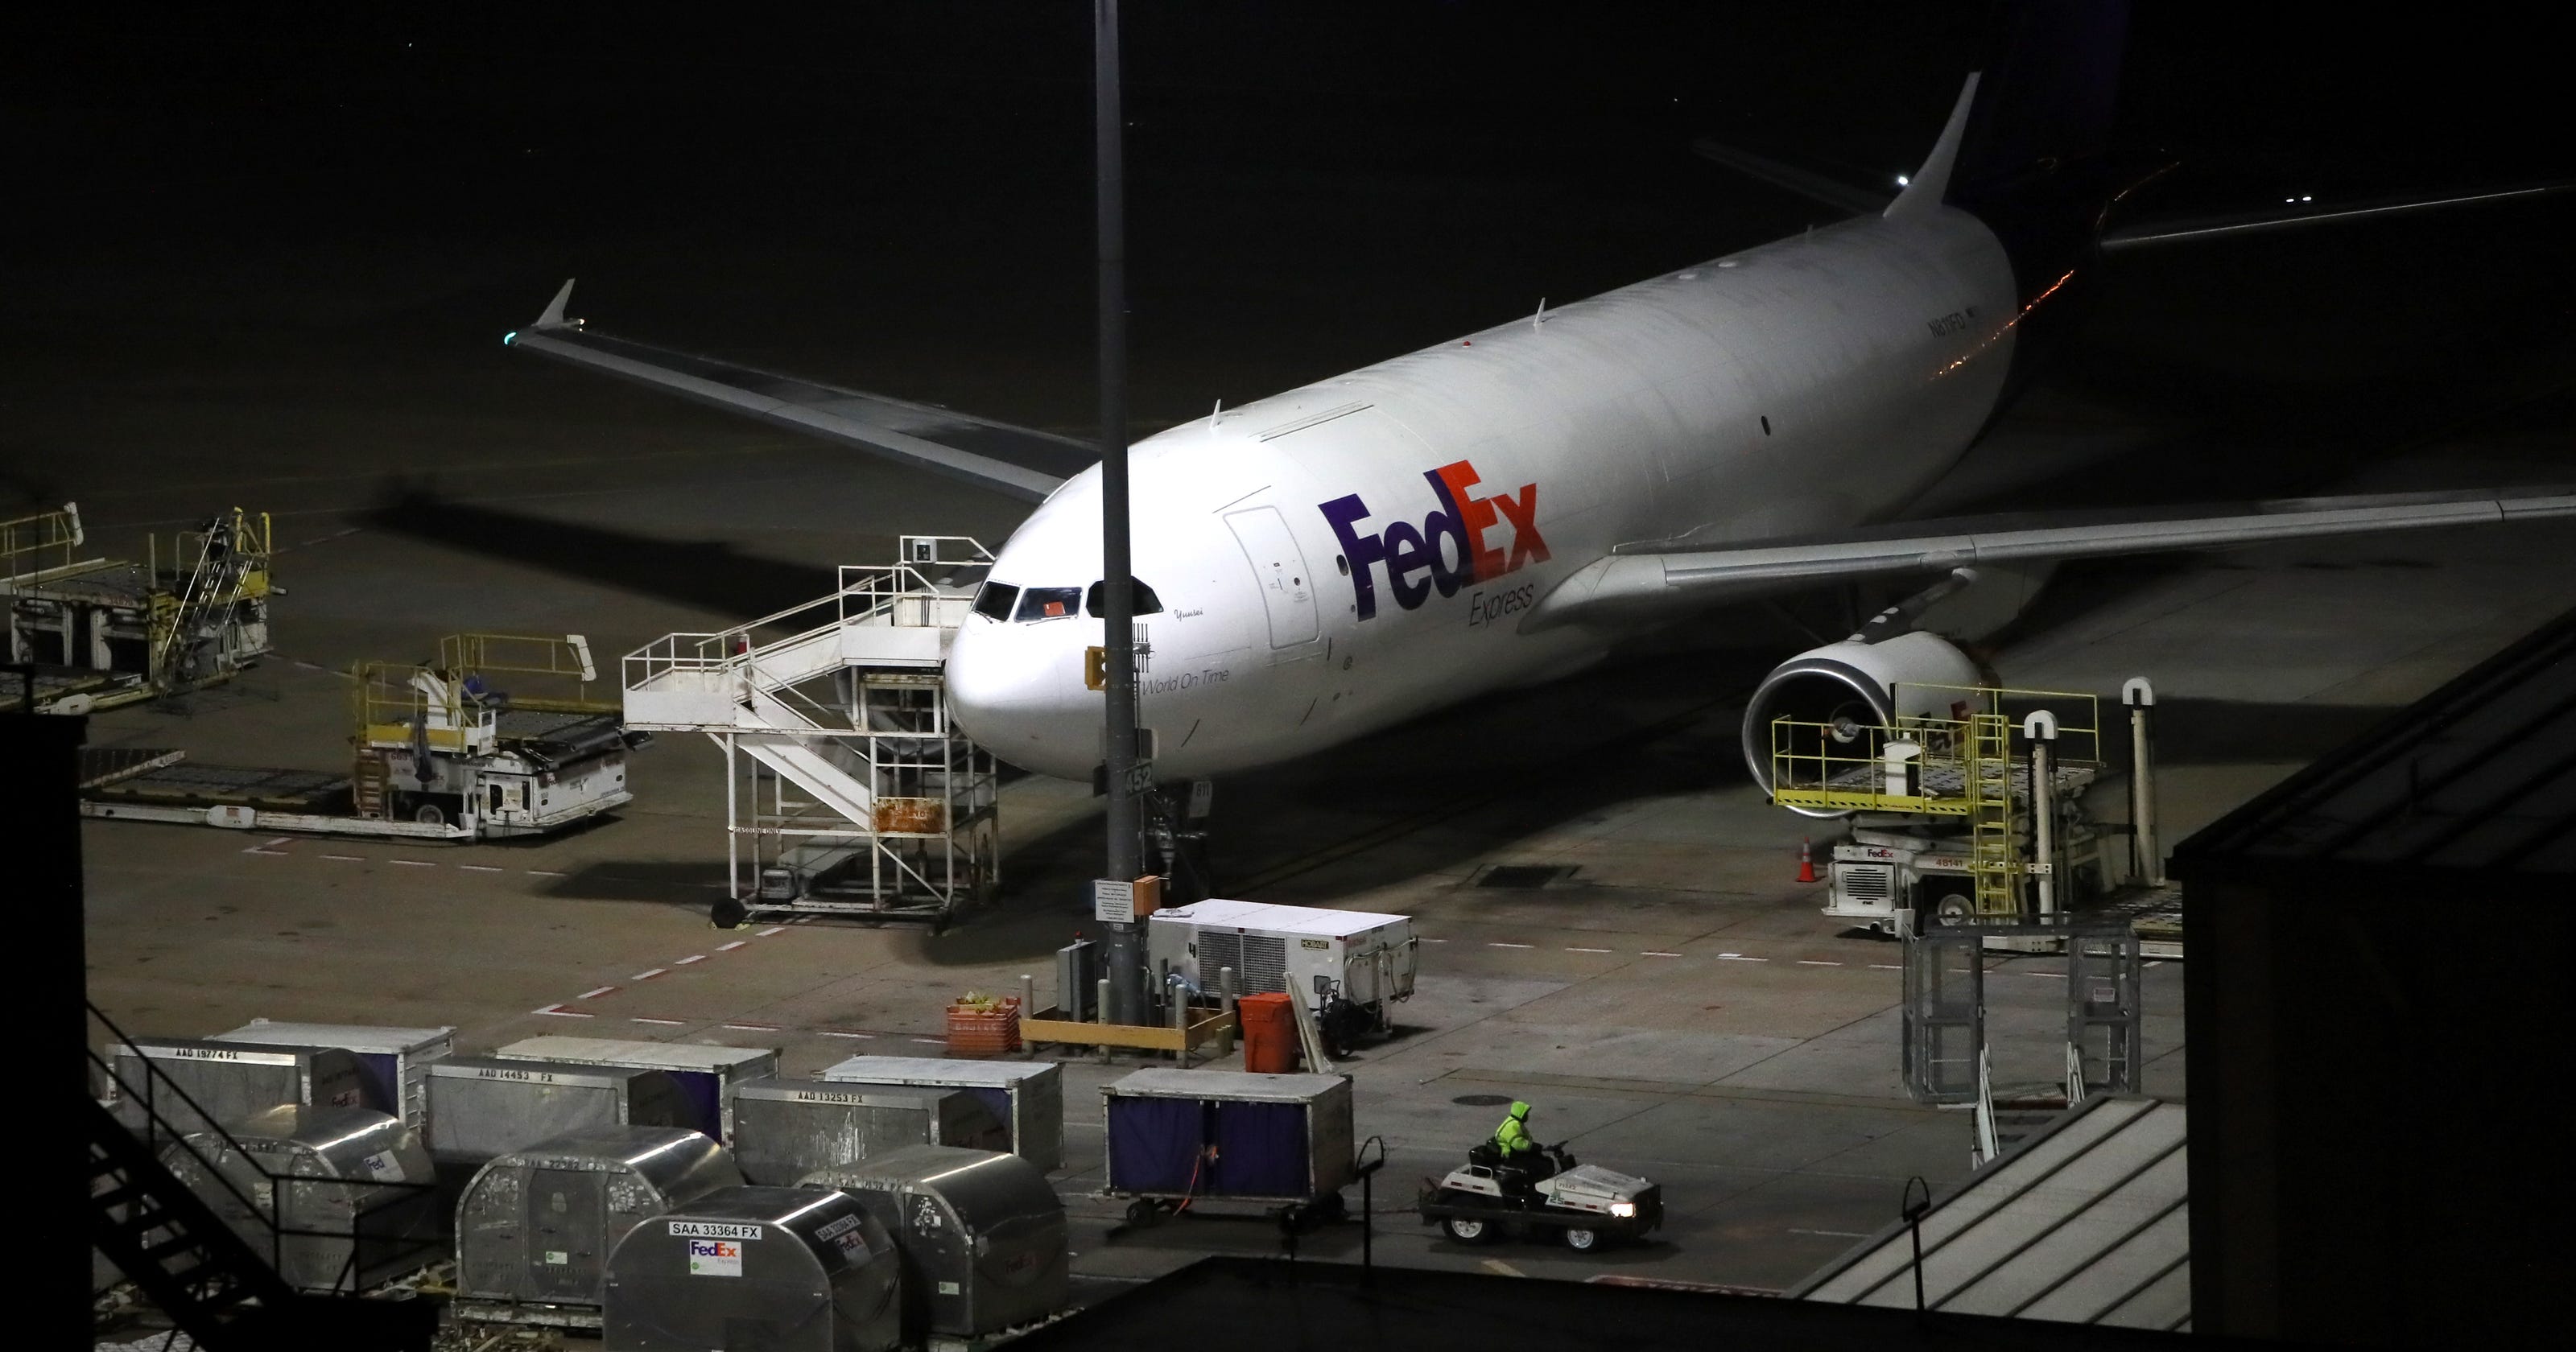 FedEx Express pilot Todd Hohn still detained in China, union says